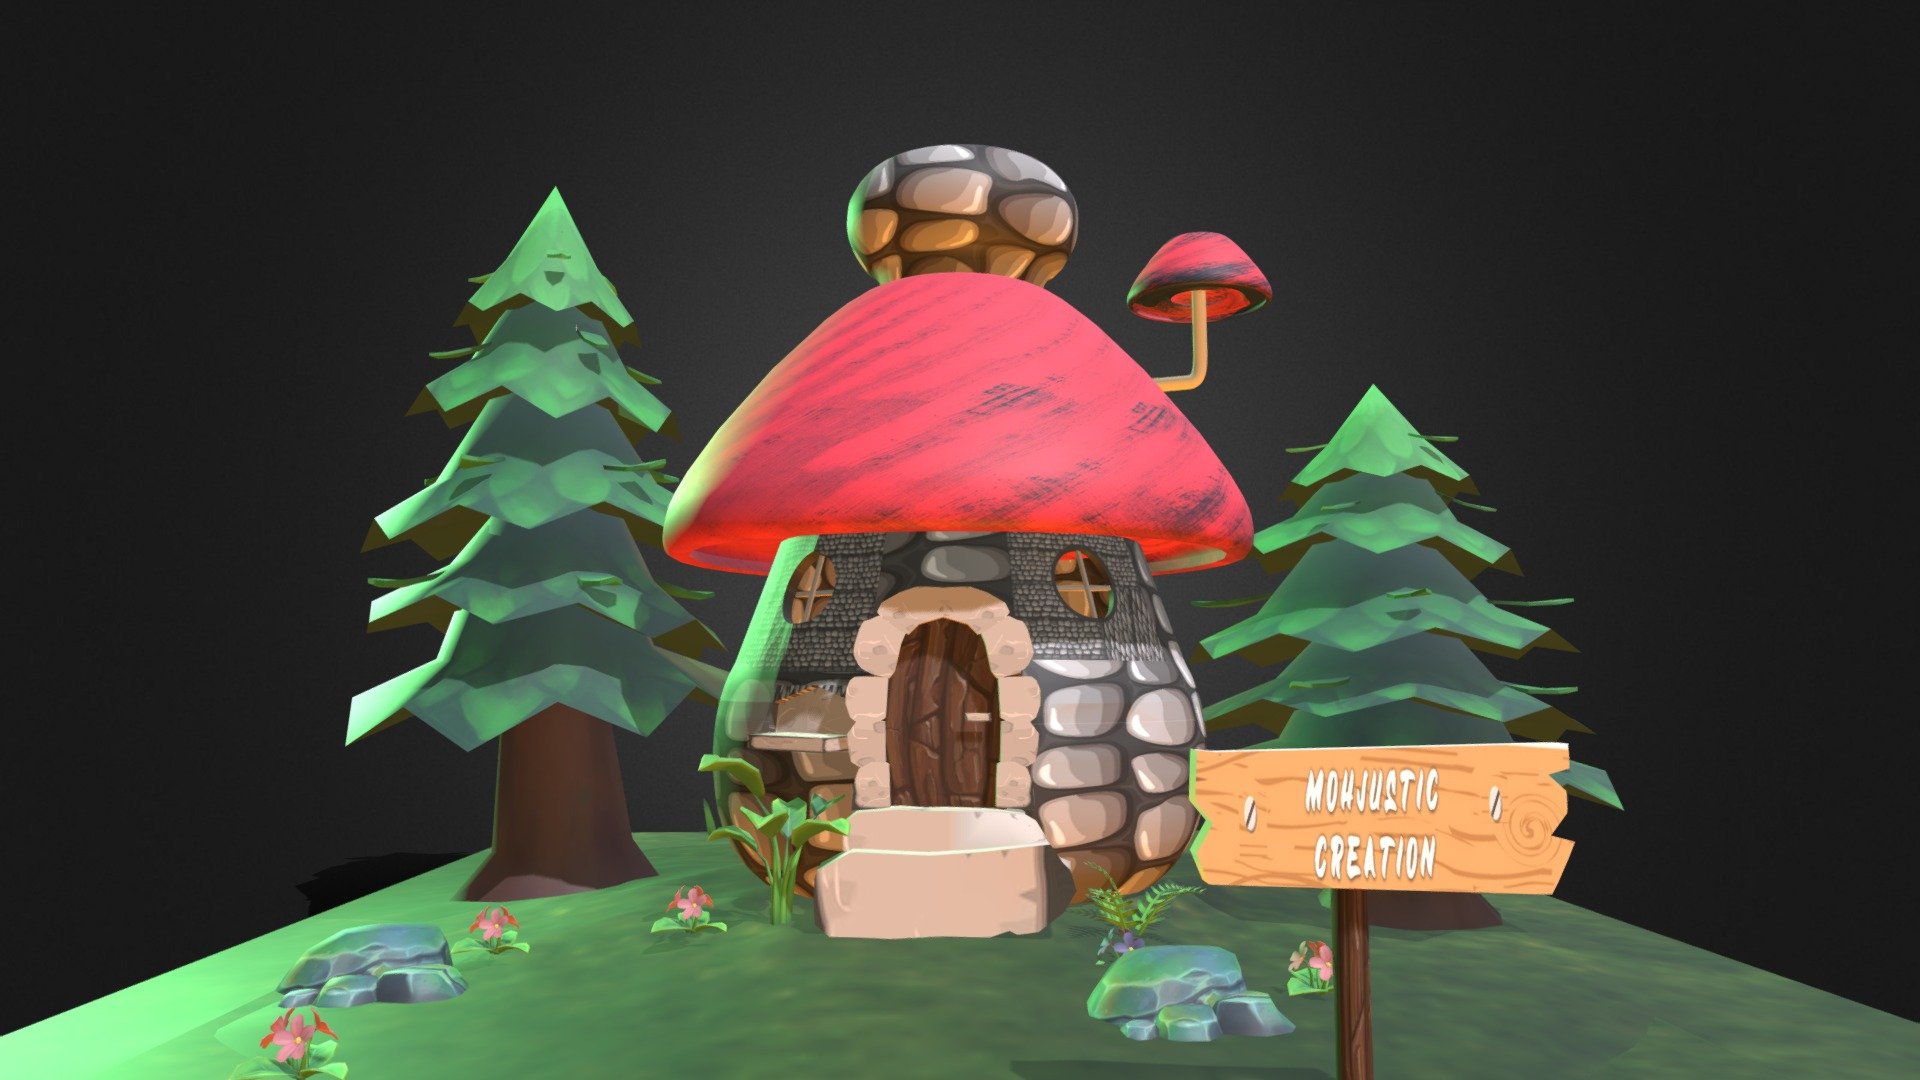 A cute house i modeled and textured based on the original concept. textures are all hand painted on diffuse. Definitely learned a lot working on this! original concept by Seojin Lee(Dune) - Mushroom lamp house - Download Free 3D model by mohjustic (@mohanm12061997) 3d model